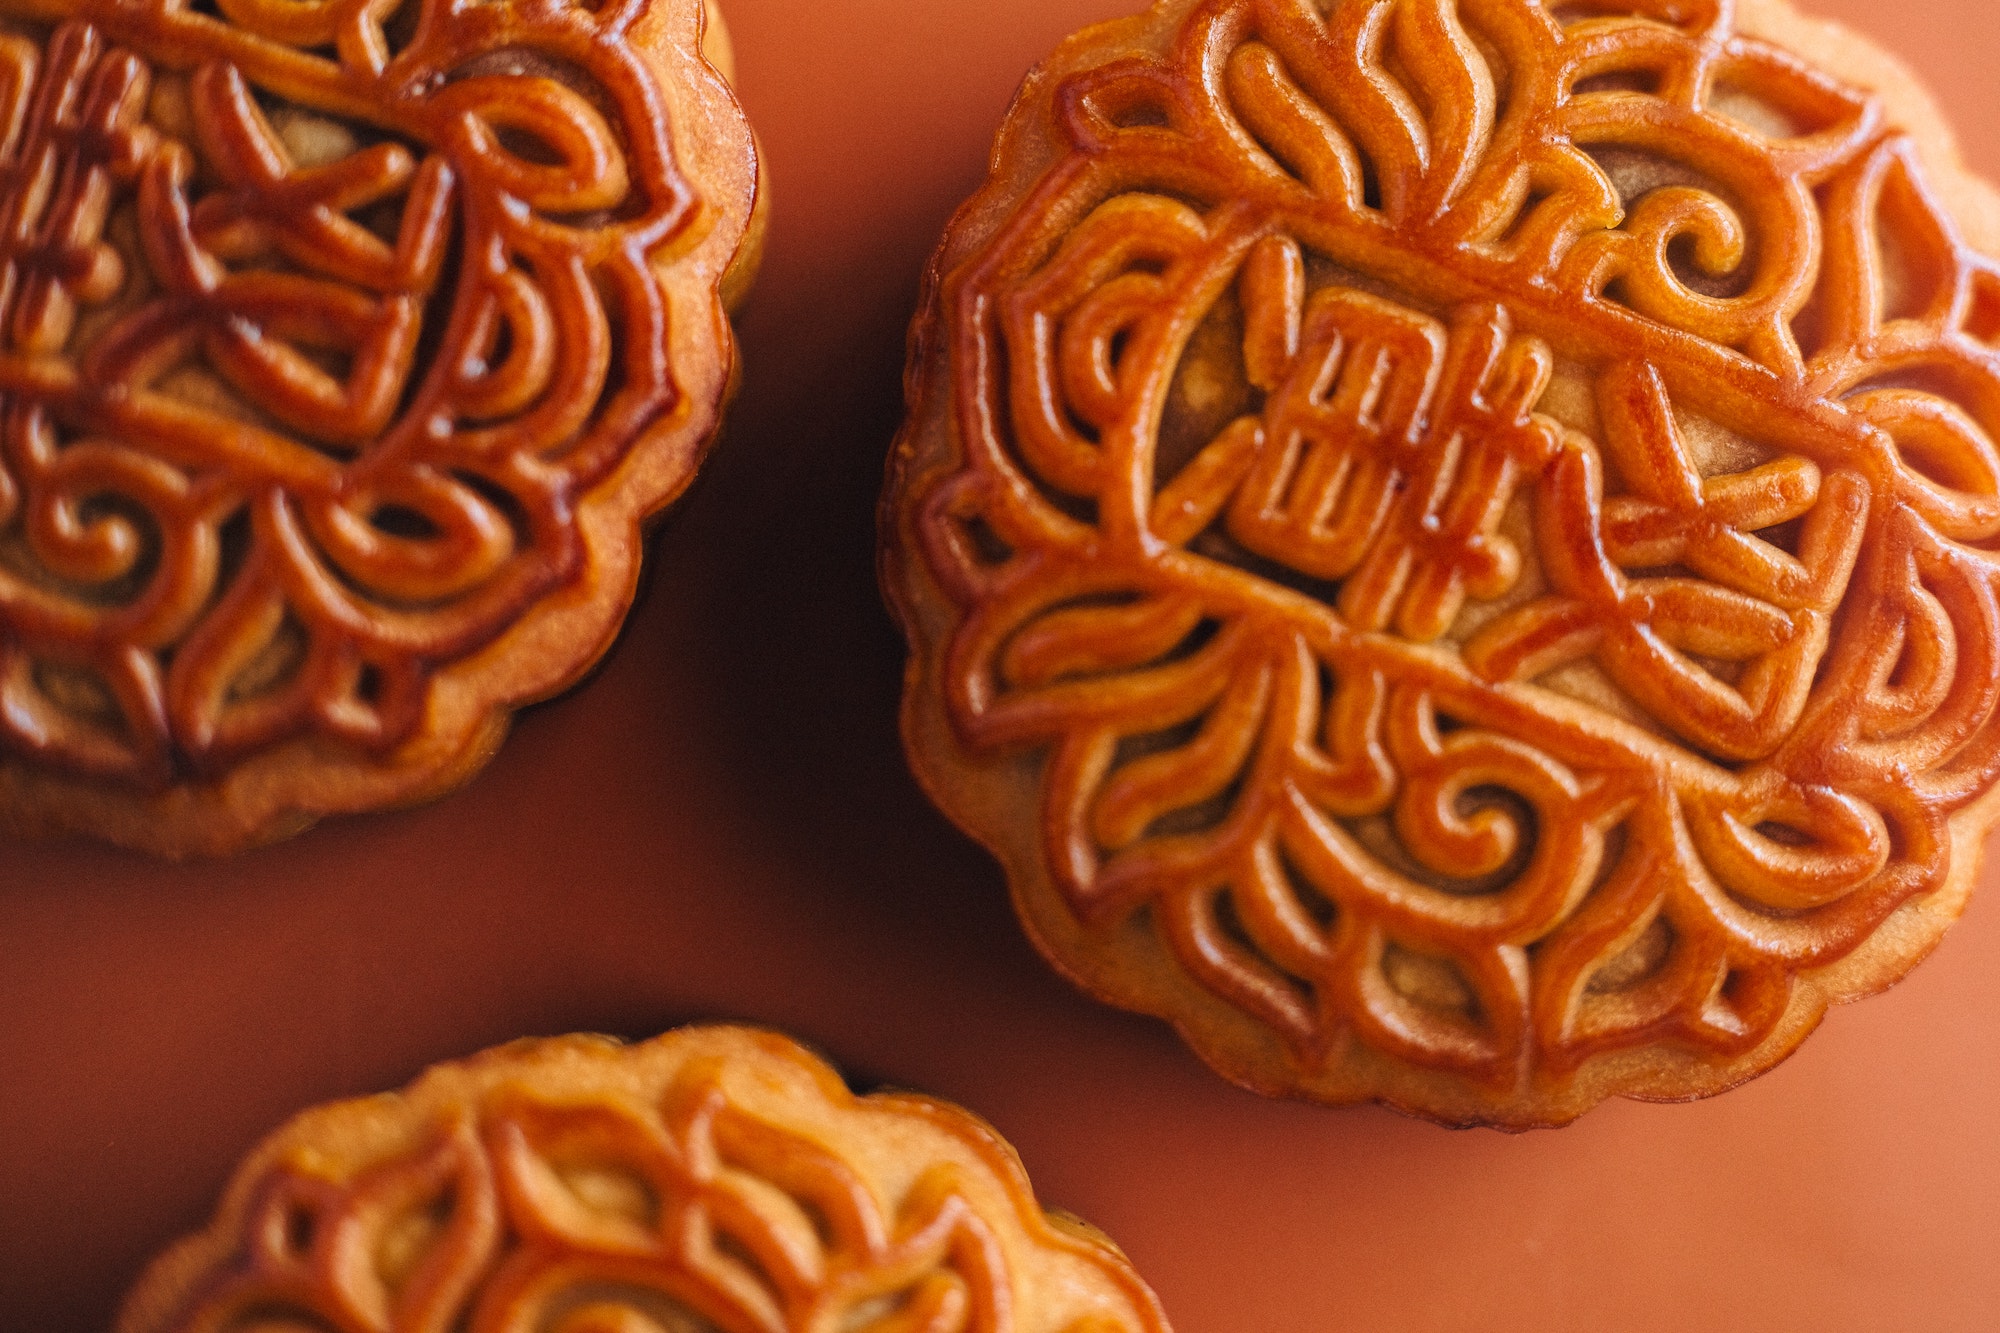 The Best Mooncakes To Enjoy This Mid-Autumn Festival 2021